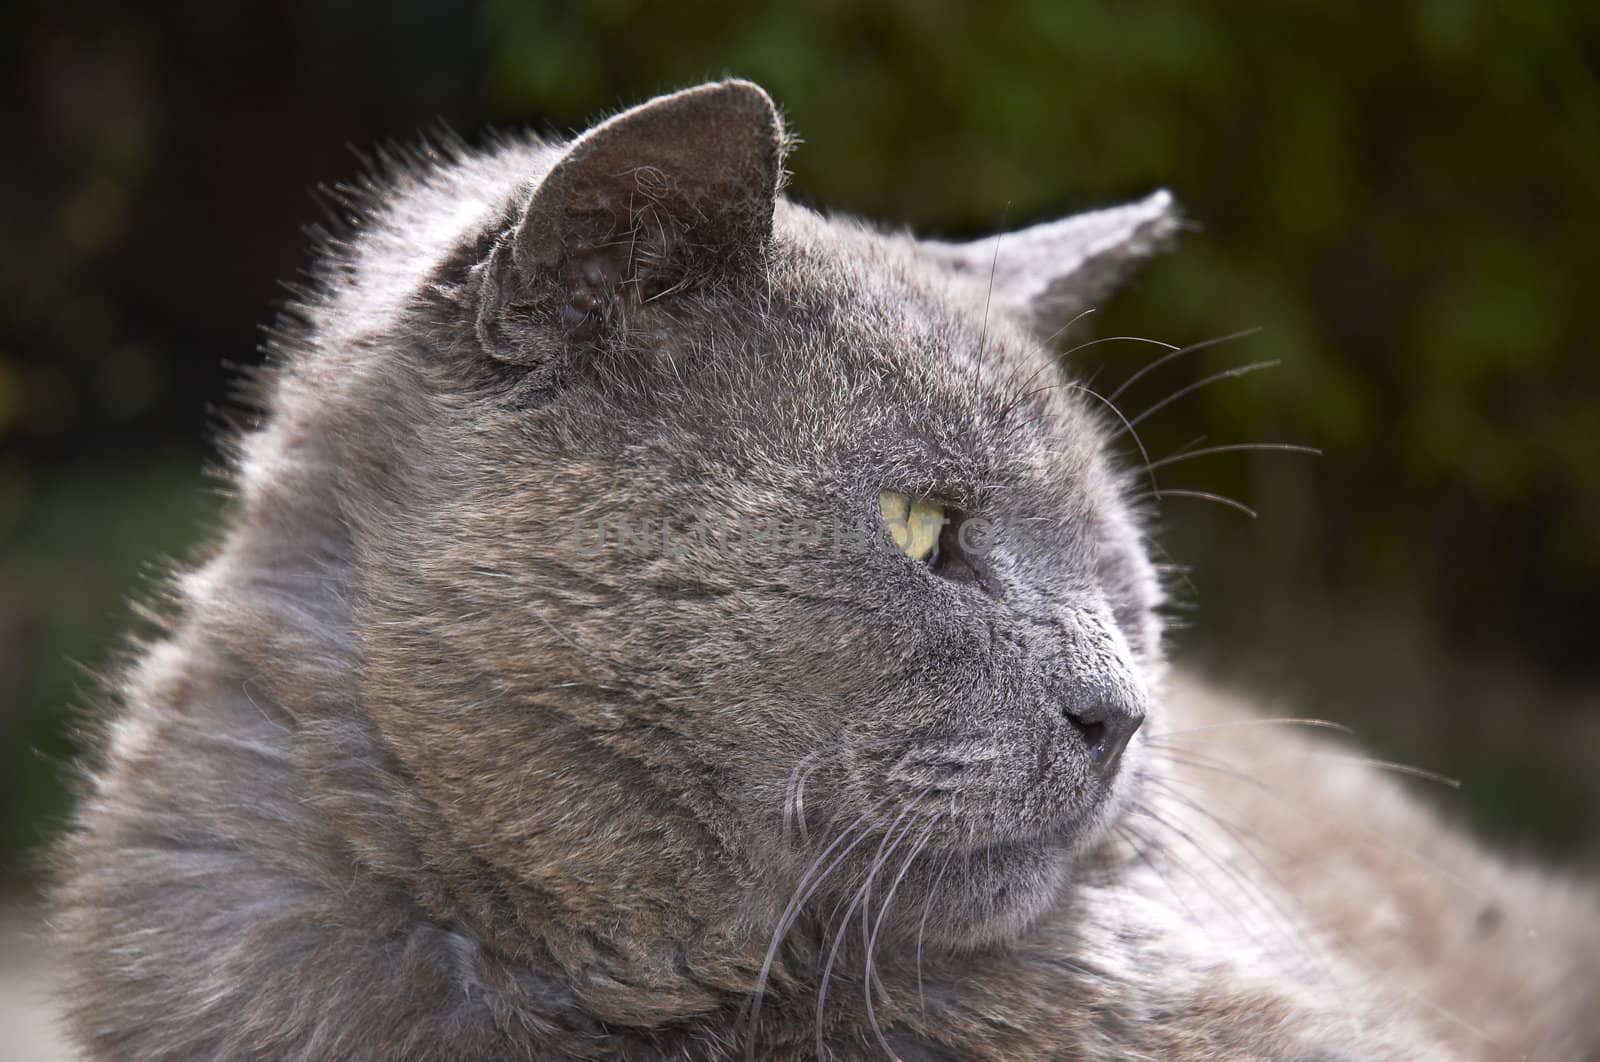 A gray cat on the patio in the sunshine